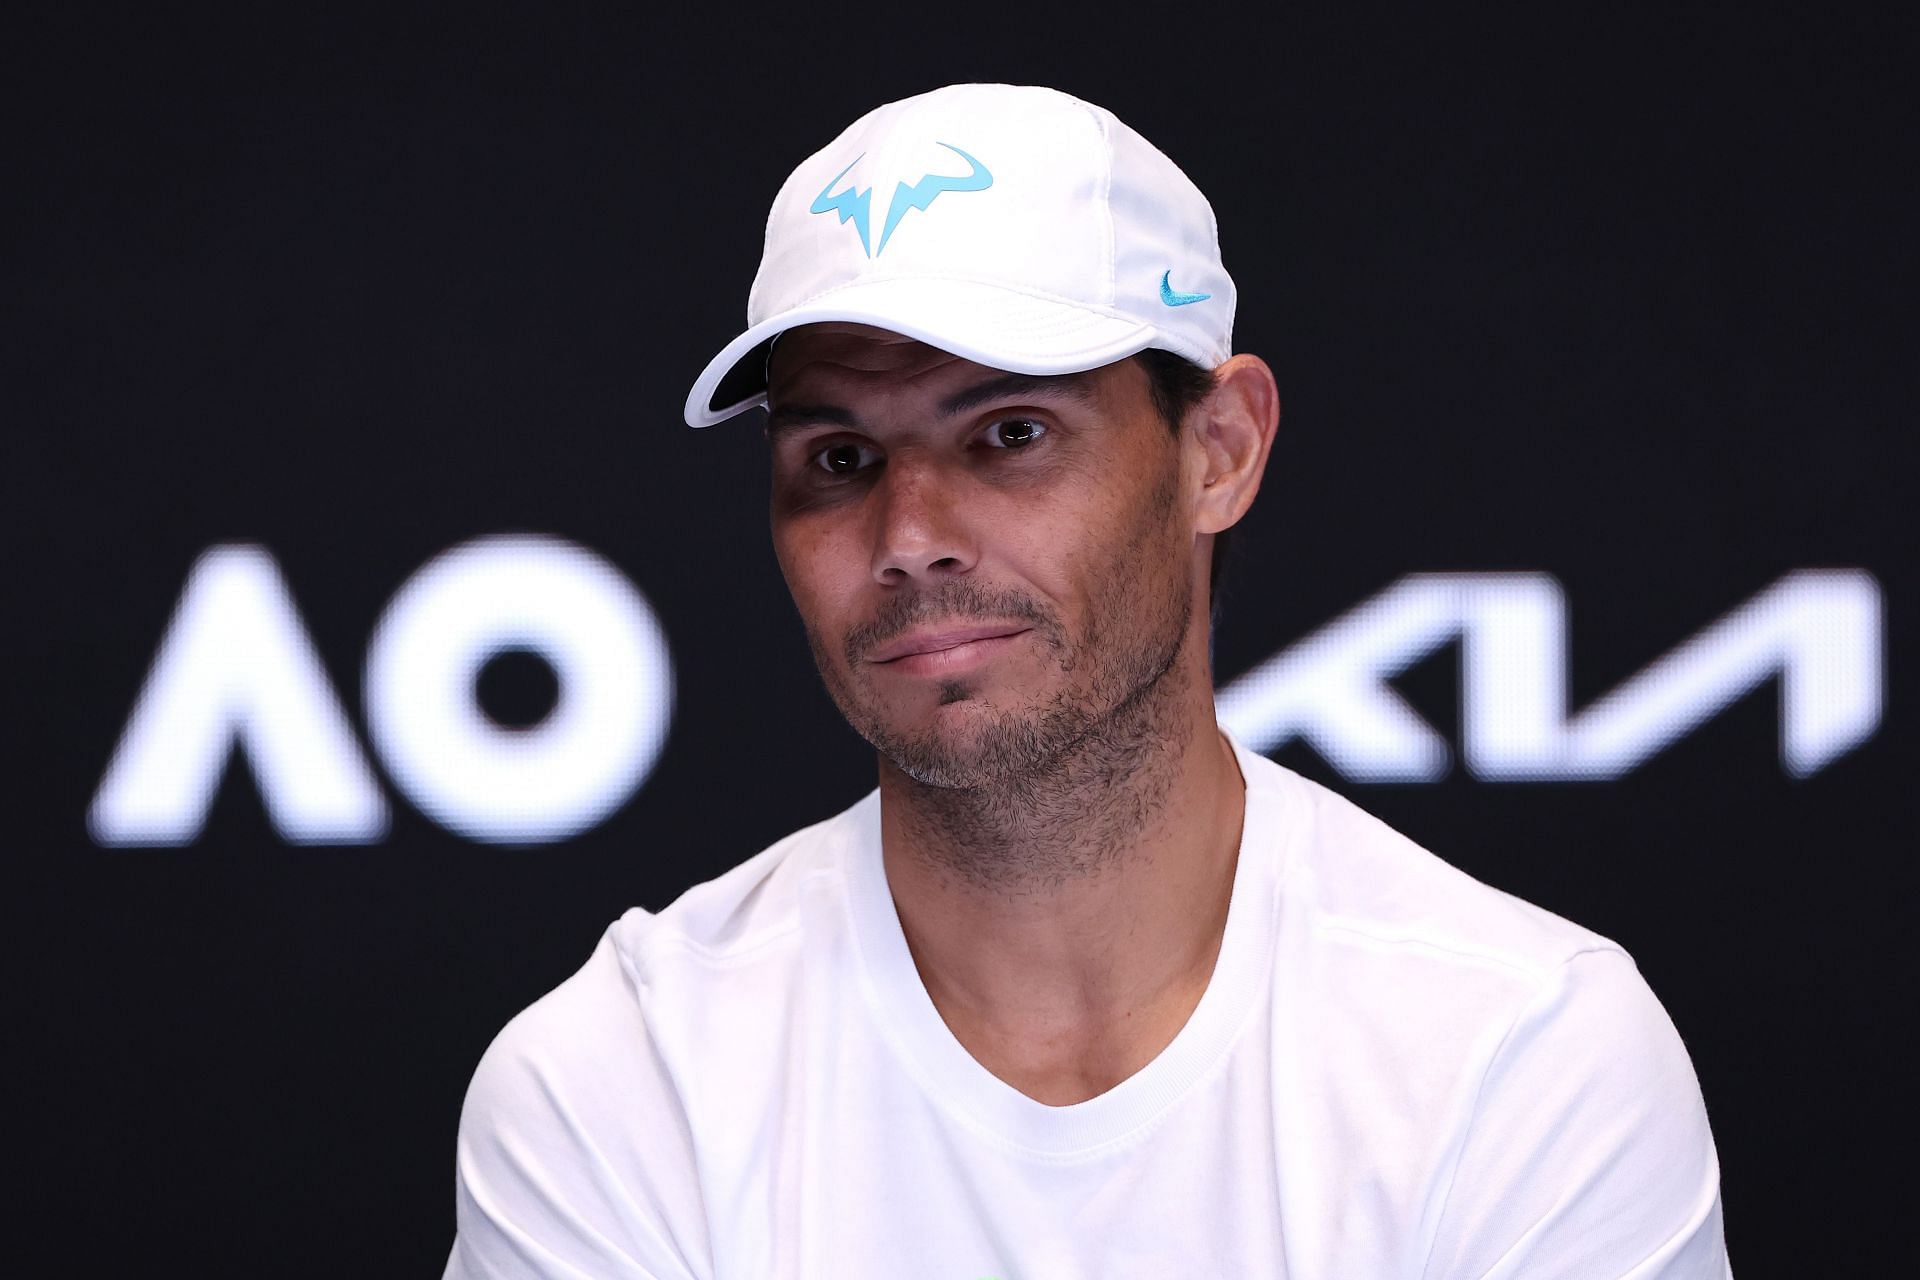 Rafael Nadal speaks to the press at the Australian Open 2023 in Melbourne.